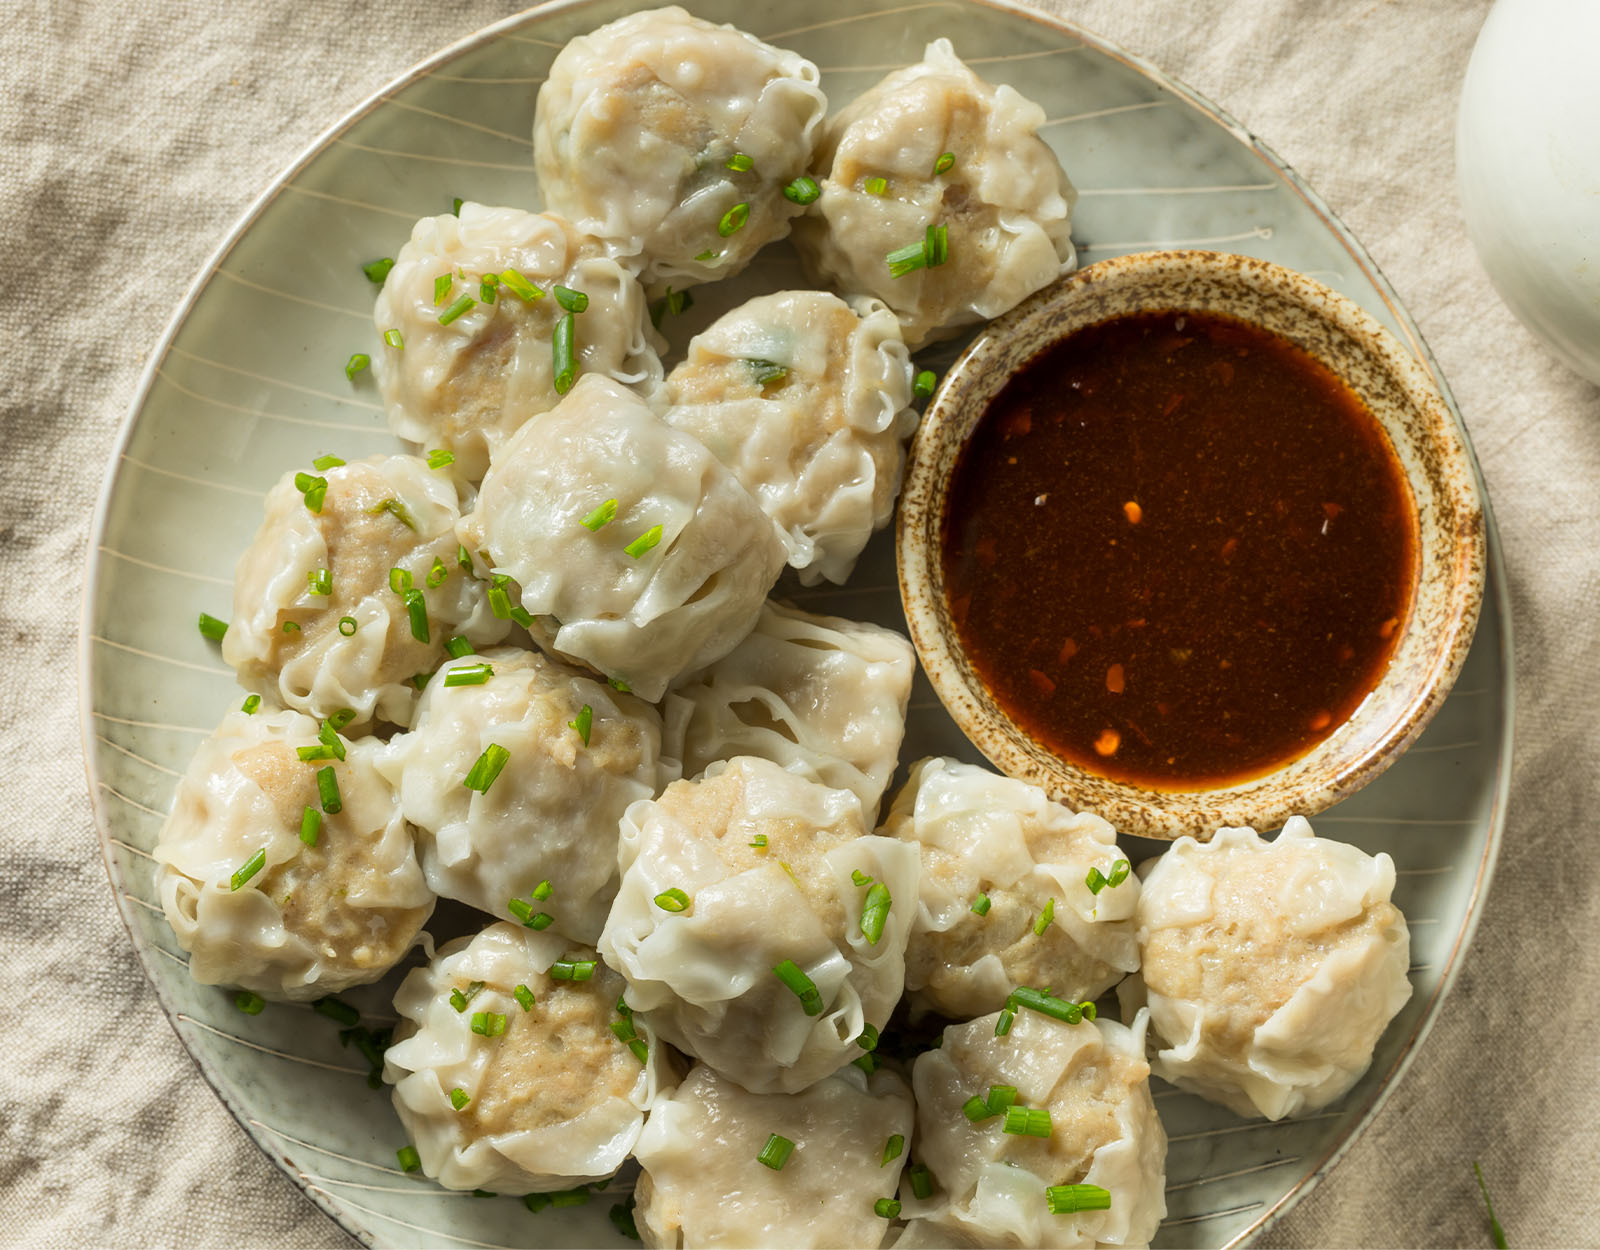 Siomai/Dumplings keep well in our kids' lunch boxes!